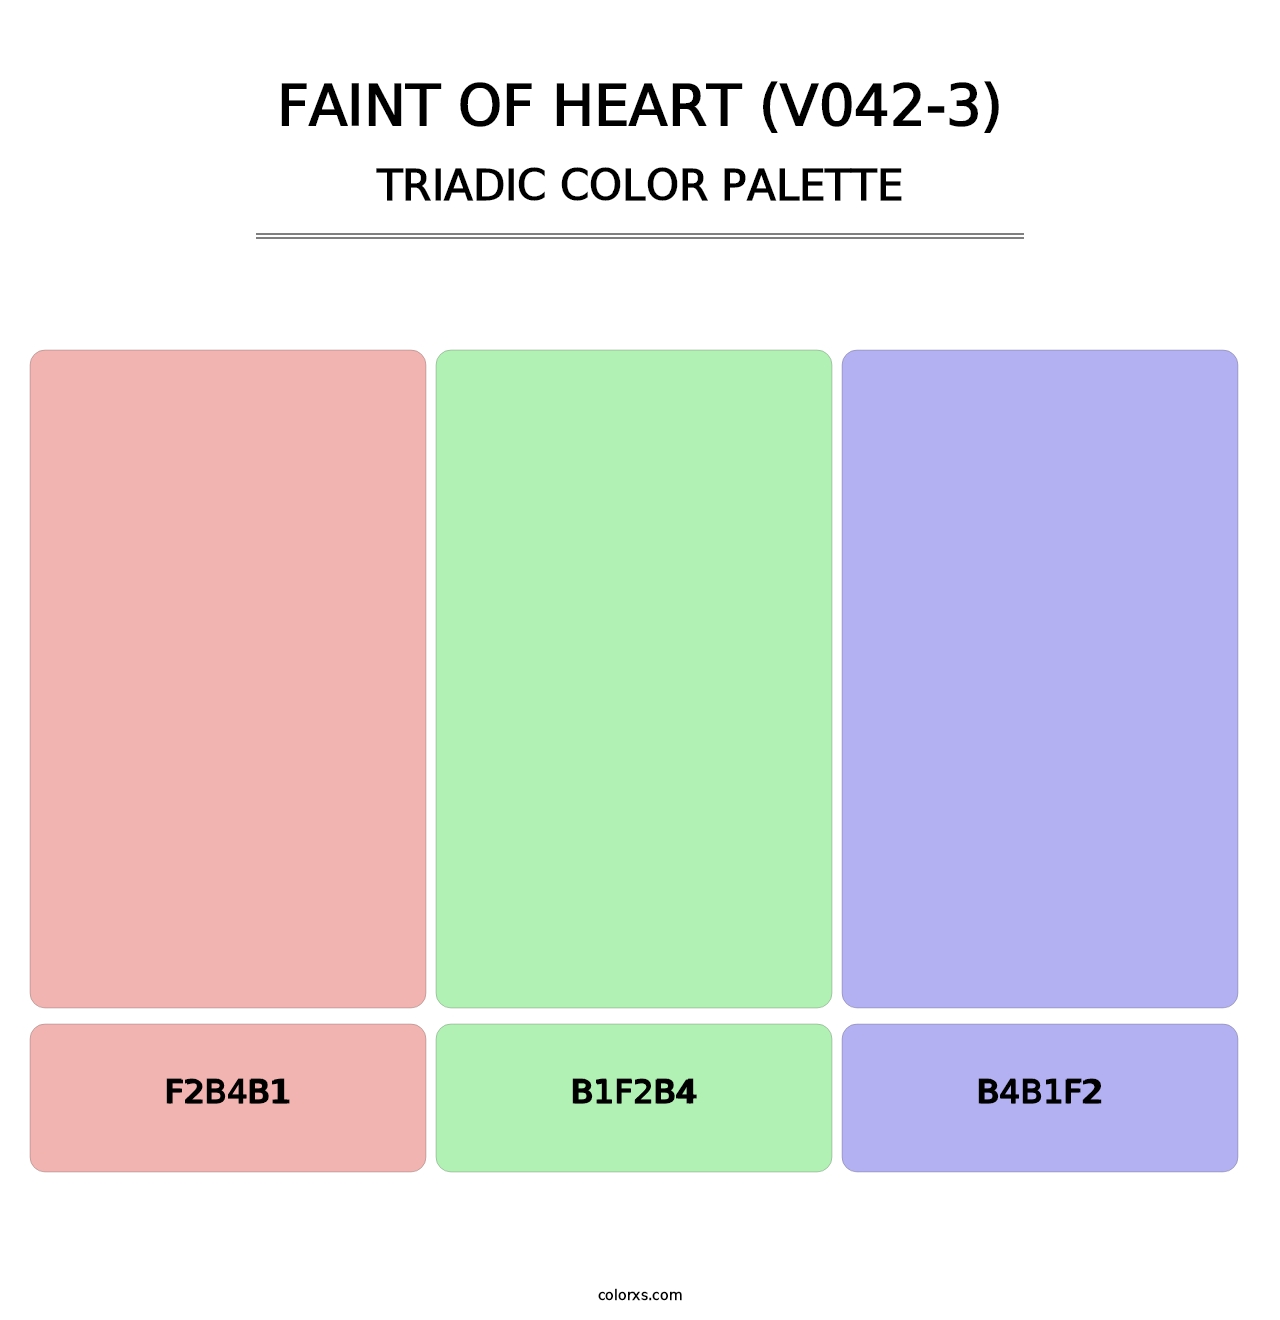 Faint of Heart (V042-3) - Triadic Color Palette